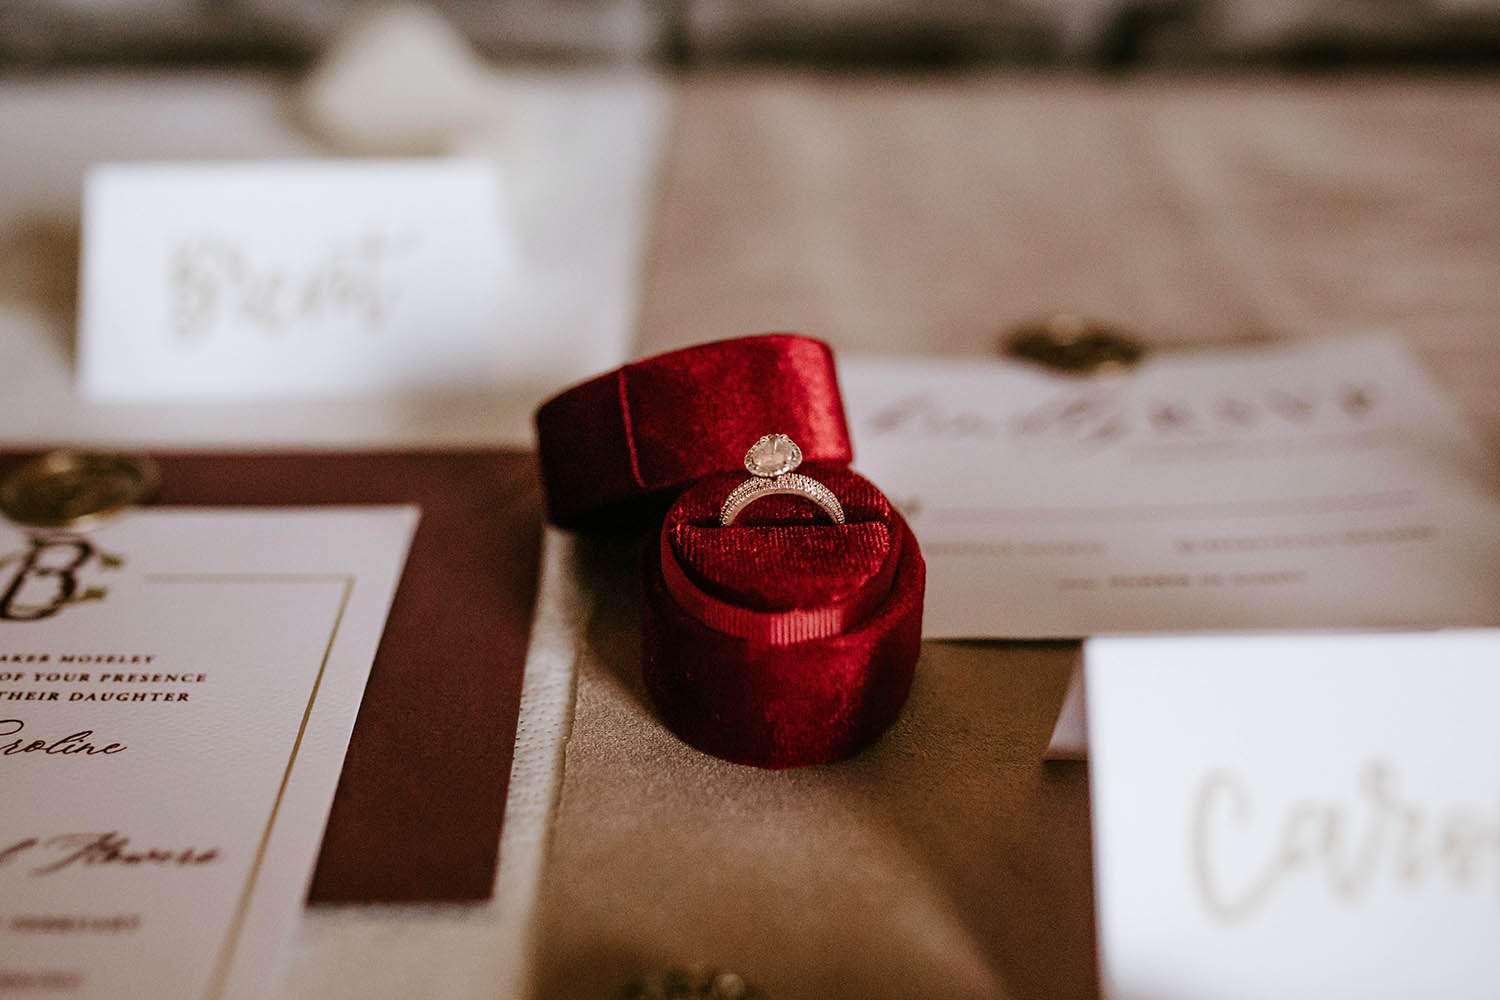 The perfect setting for this velvet engagement ring box